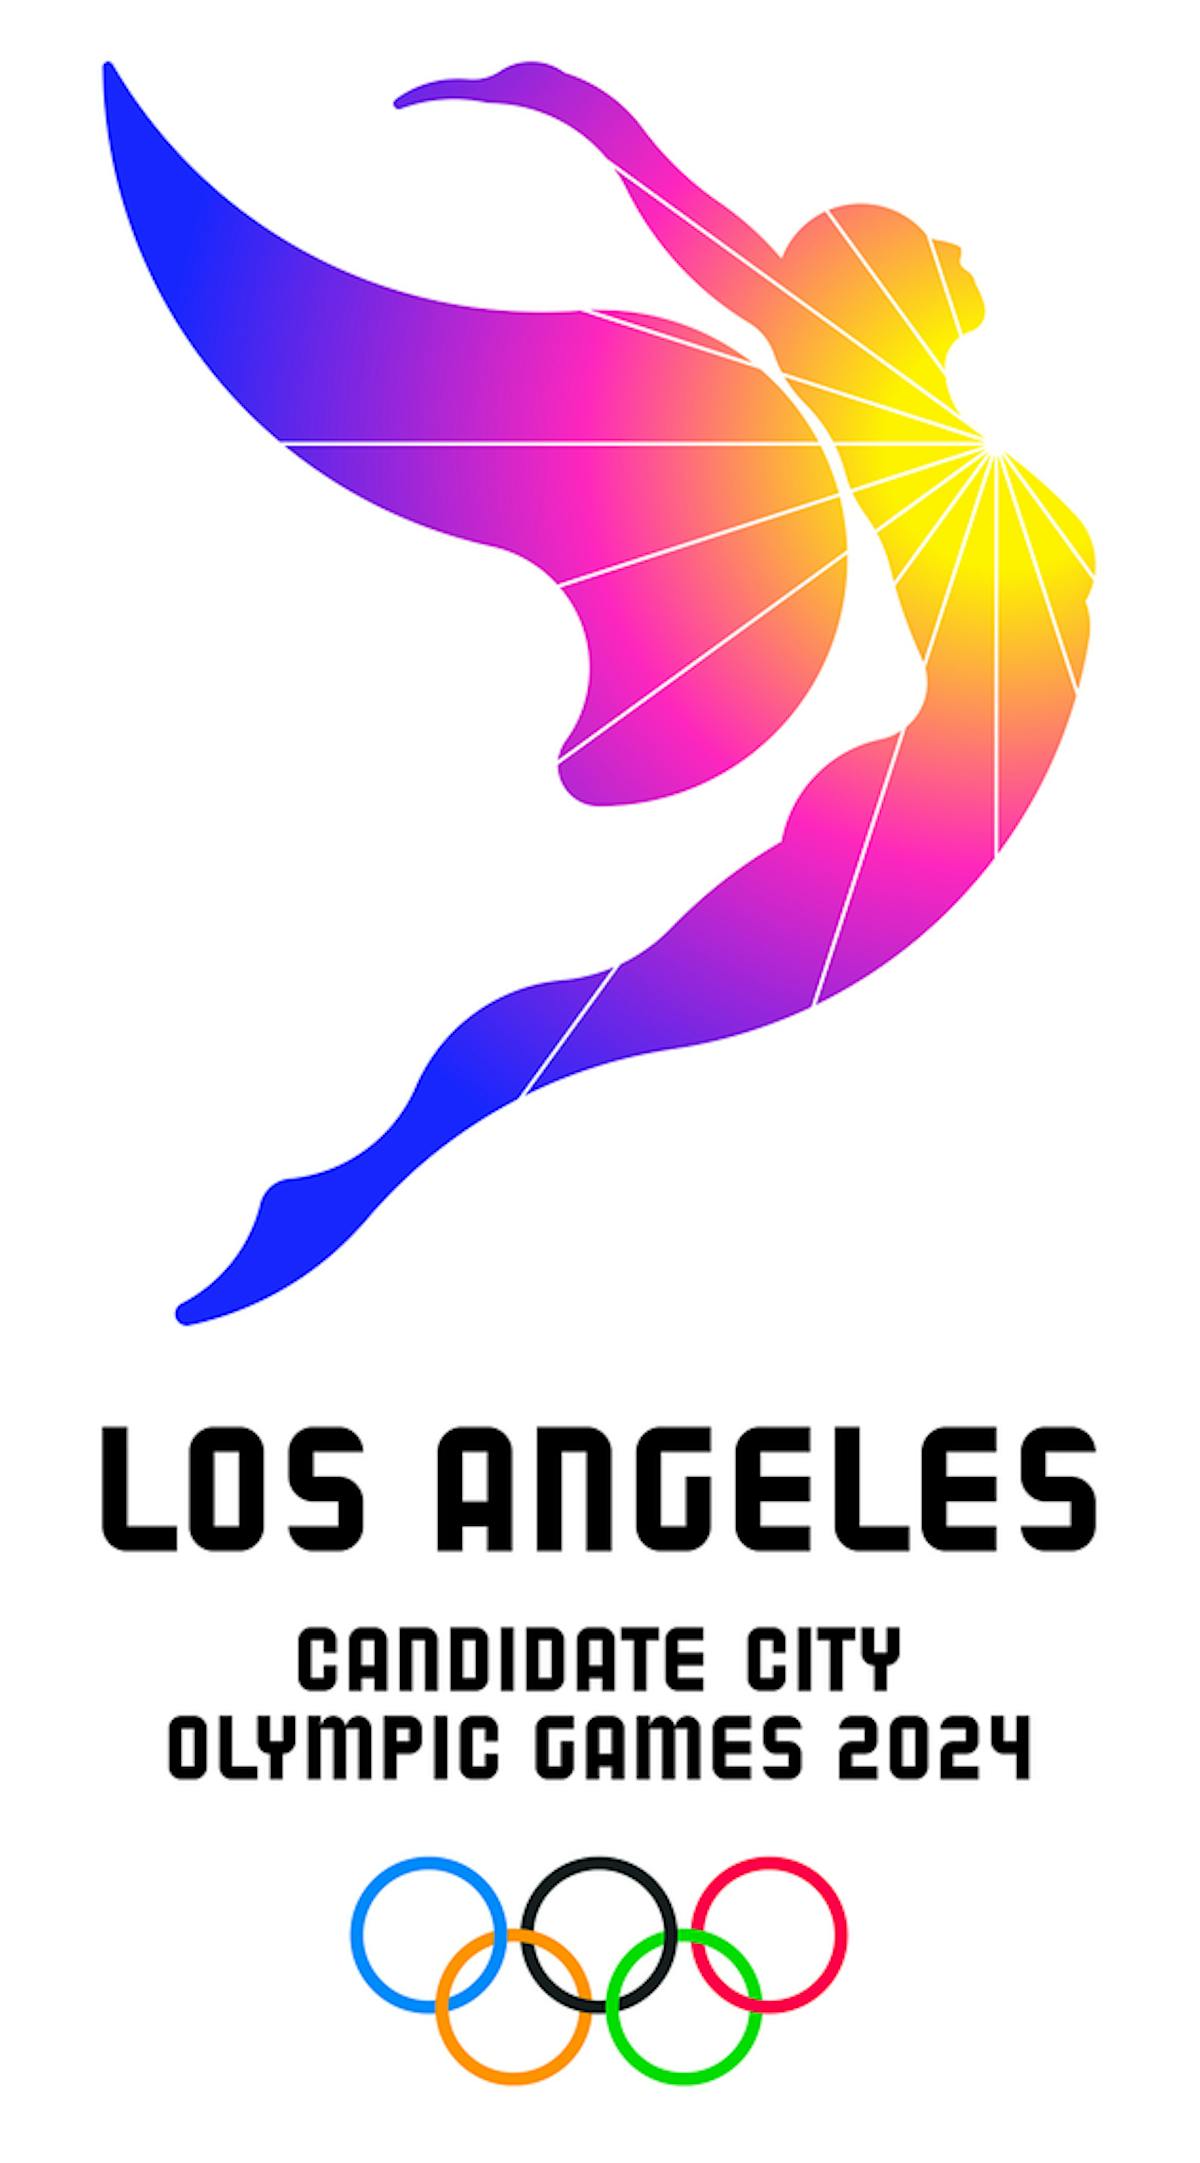 LA 2024 plays up a sunny disposition in their logo for the Olympic bid